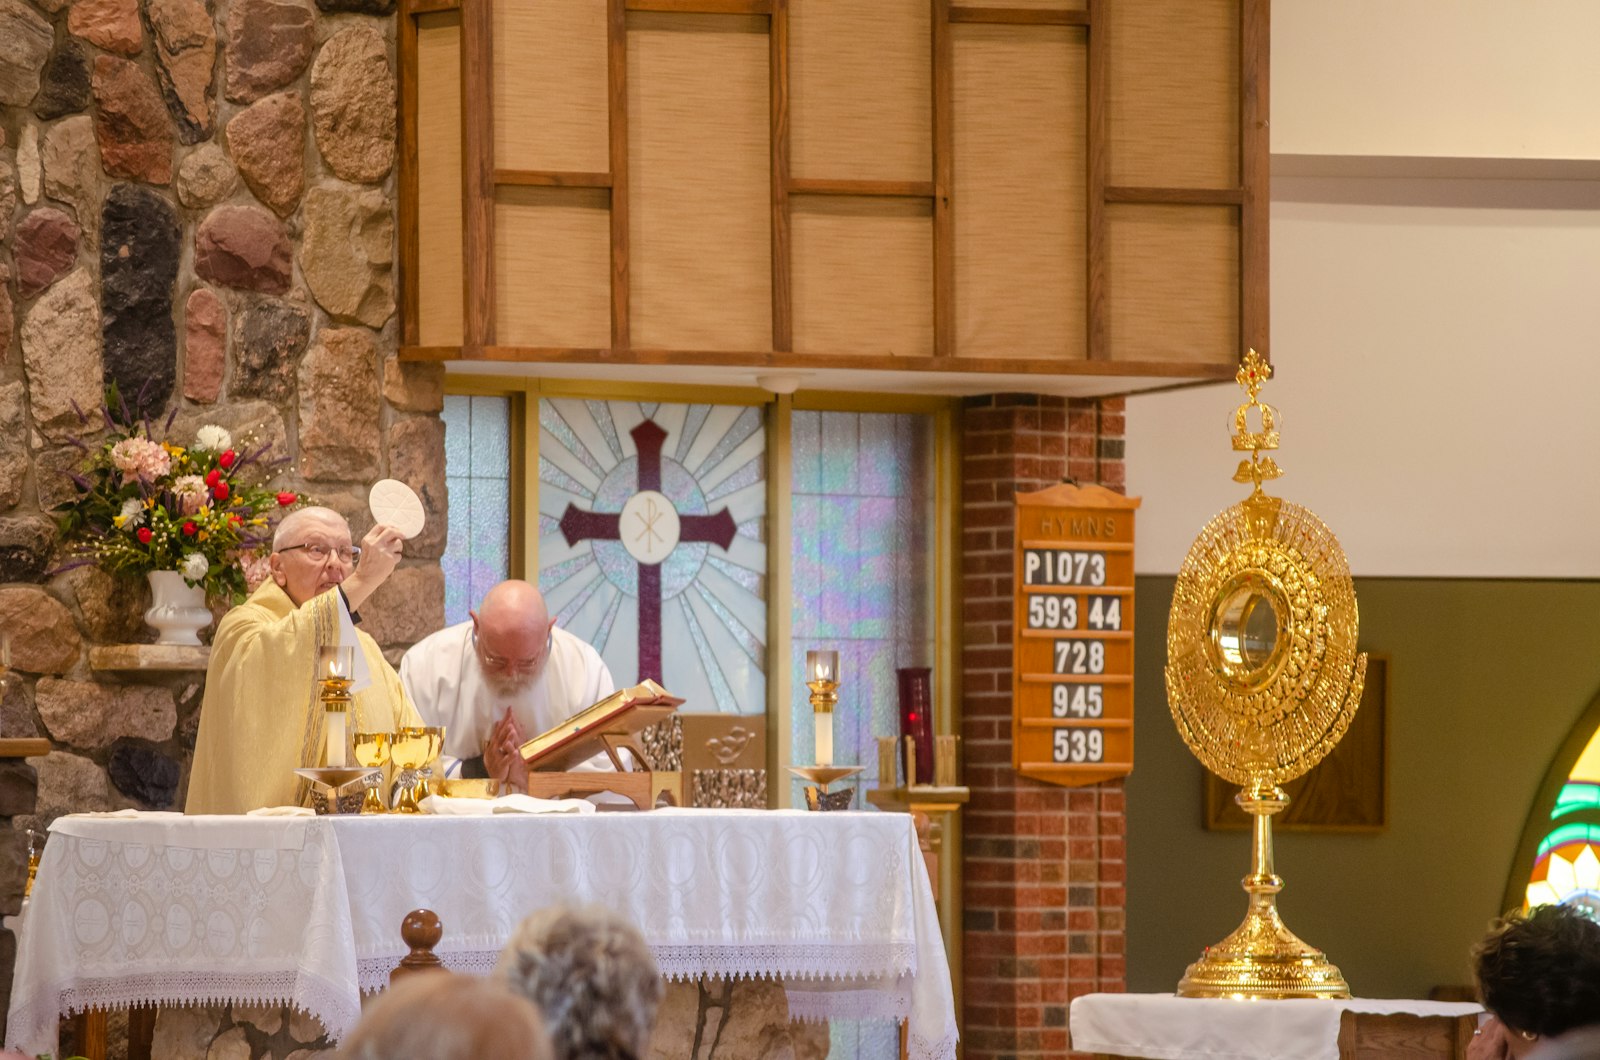 Fr. Rich Treml, pastor of SS. Peter and Paul Parish, consecrates the Eucharistic host during a Mass preceding the adoration at the rural northern Lapeer parish.